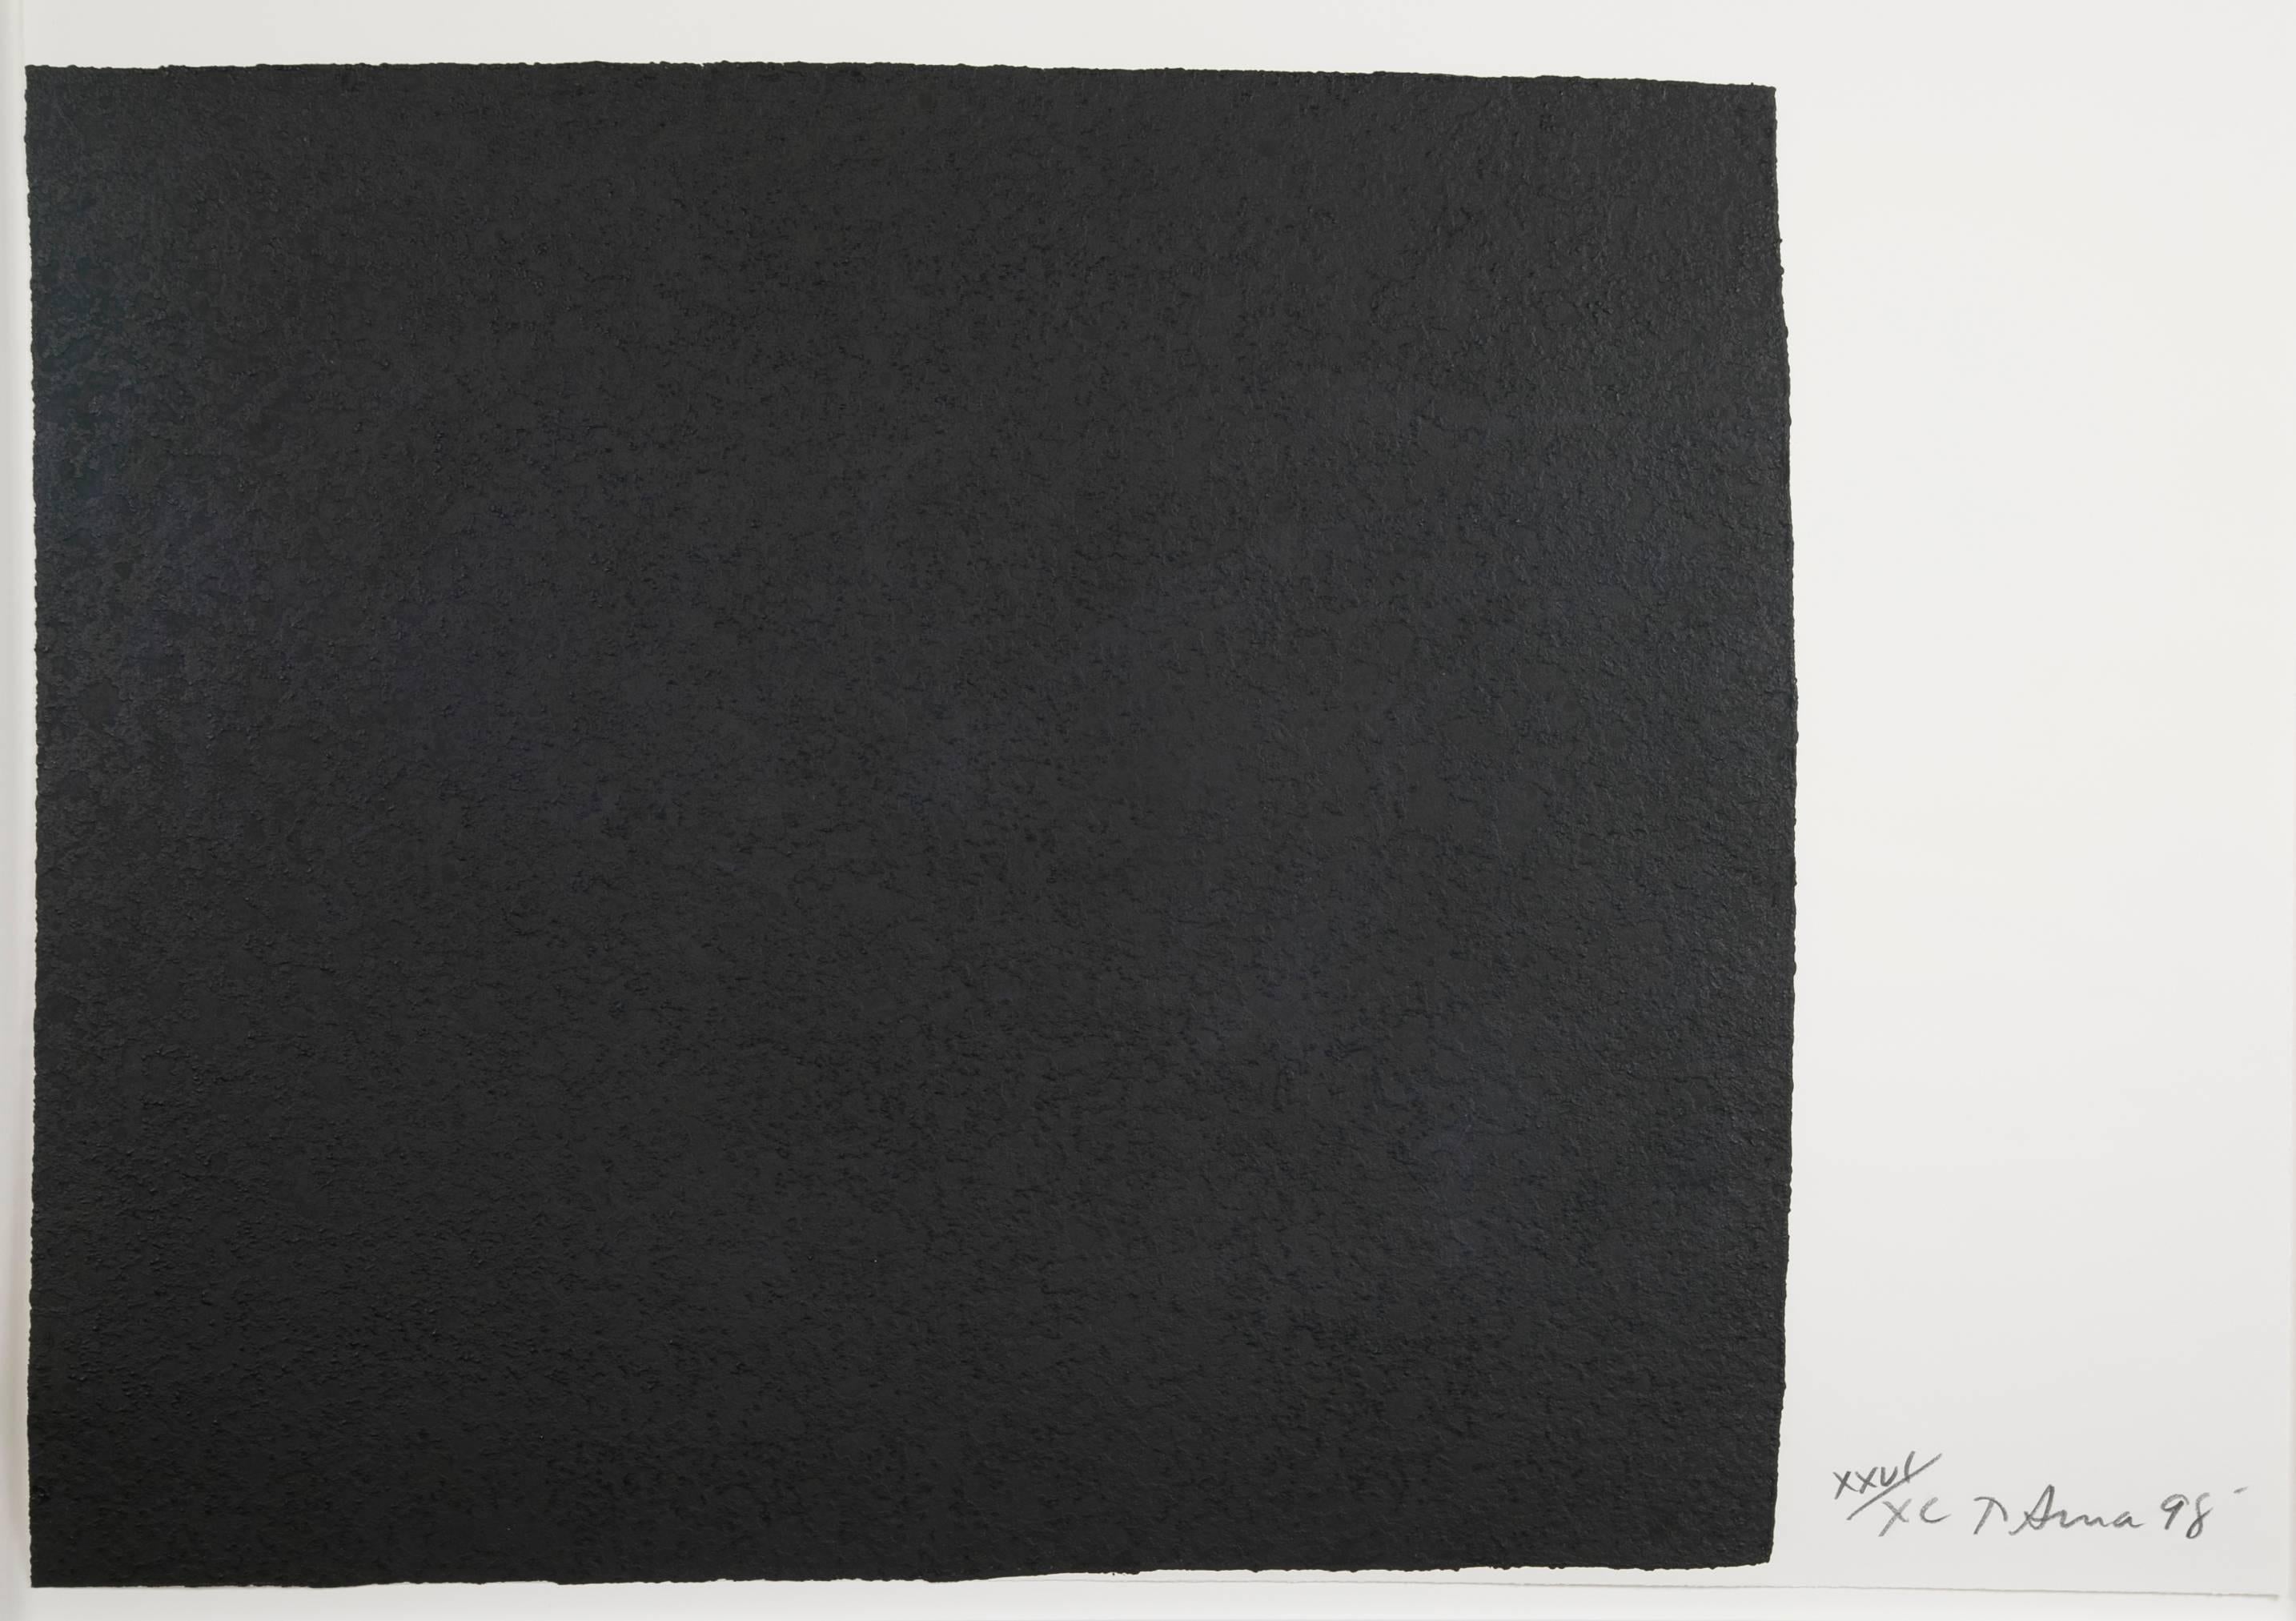 Etching and aquatint on Somerset paper by Richard Serra from the 